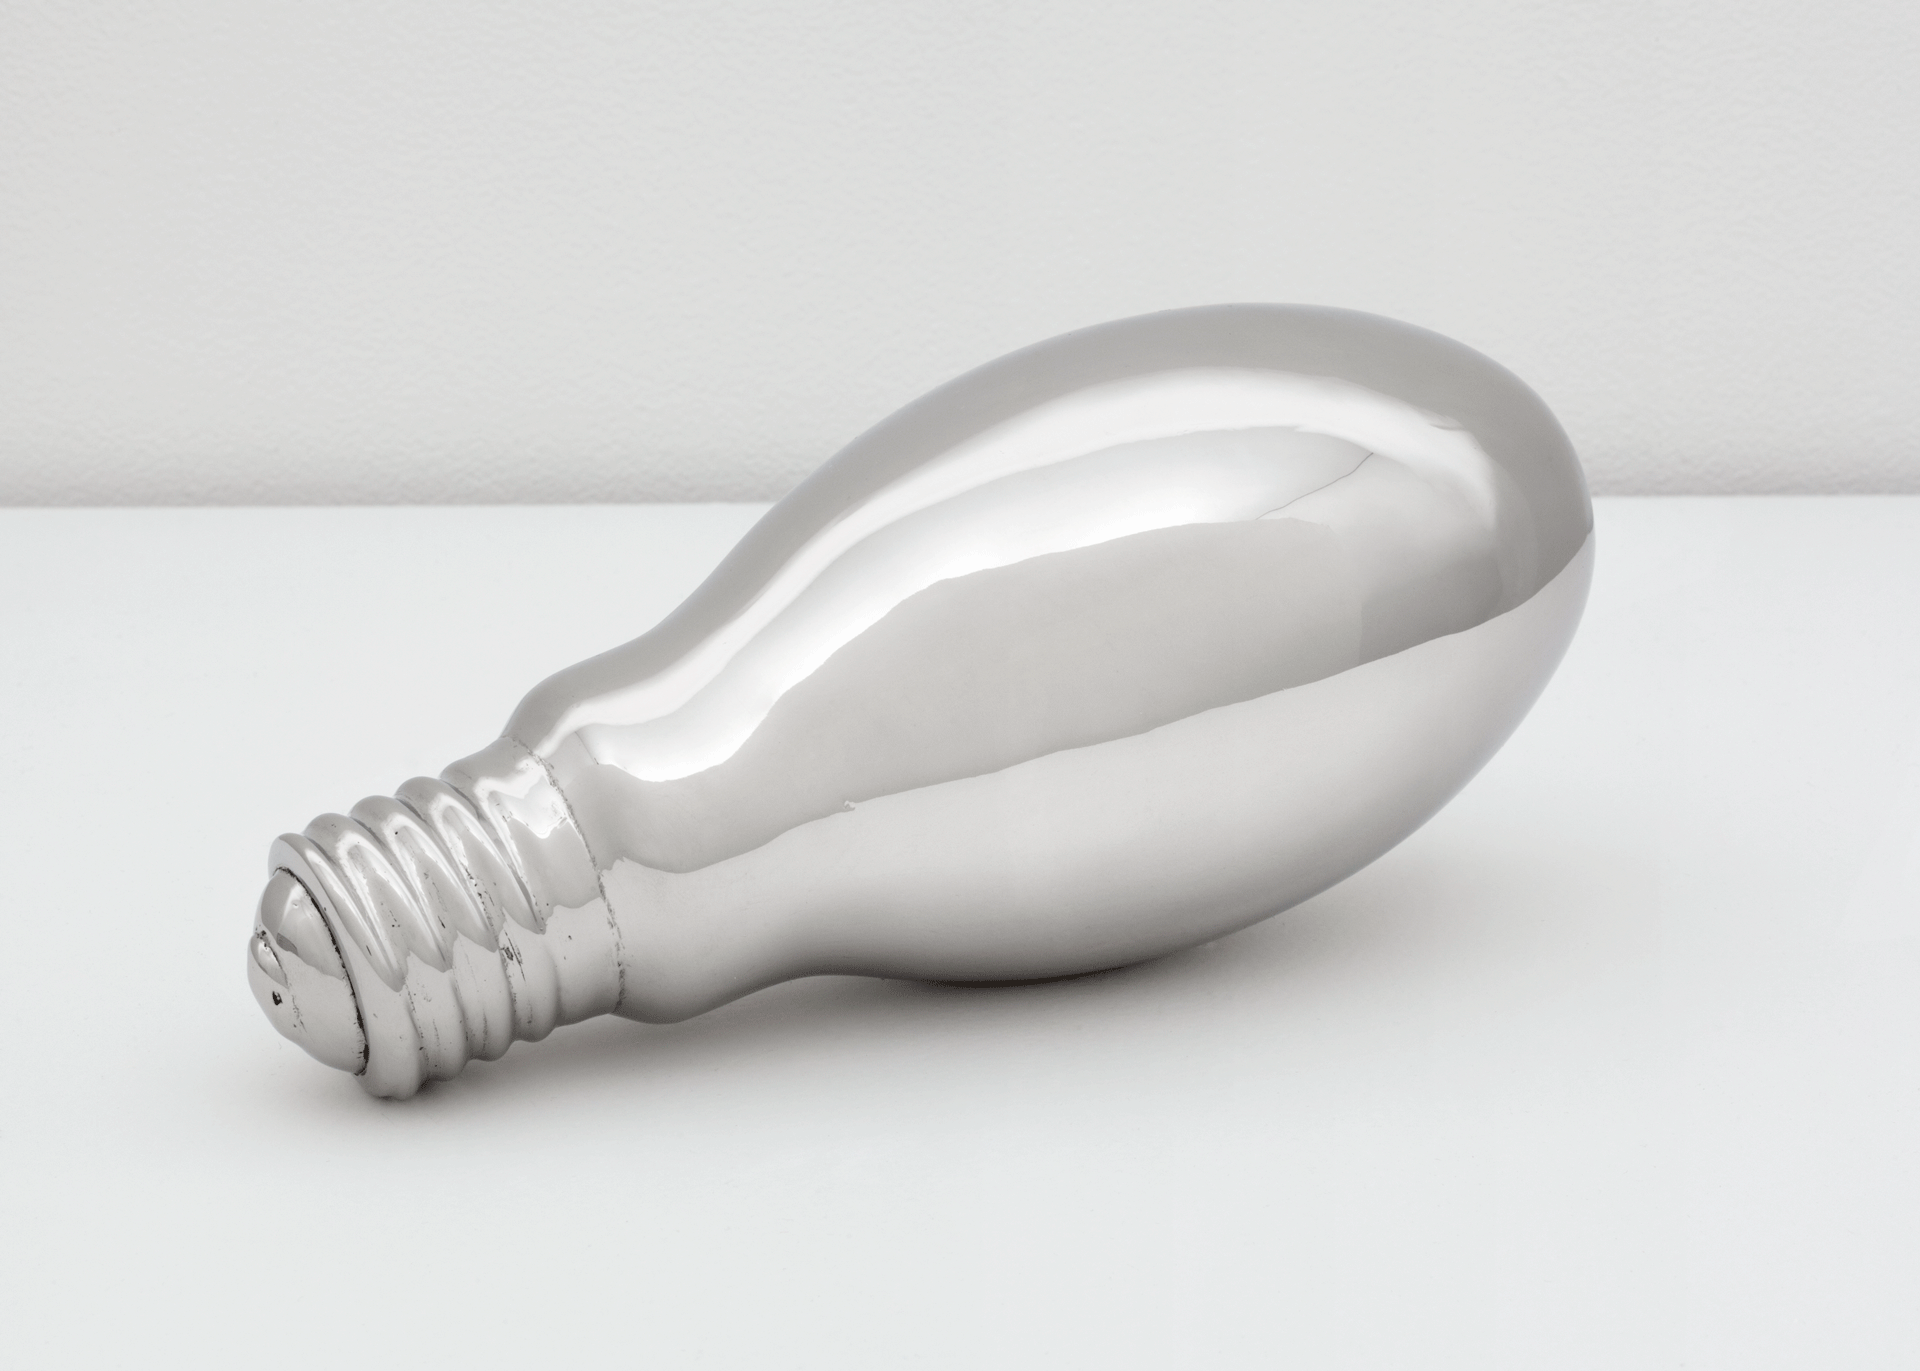 A sculpture by Sherrie Levine, titled, Light Bulb, dated 2000.